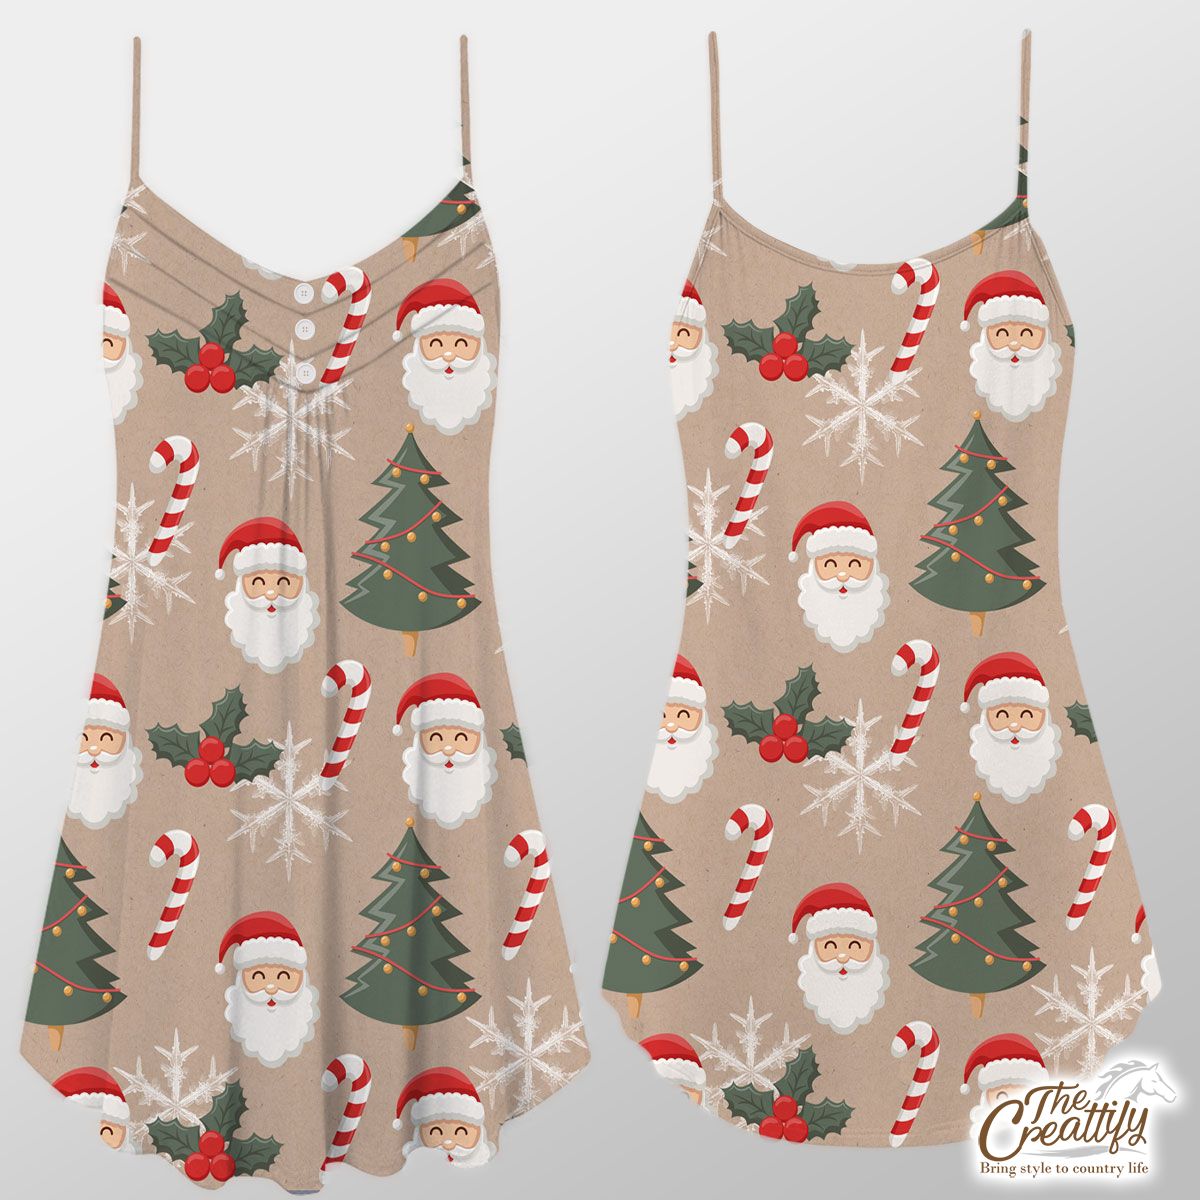 Santa Clause, Christmas Tree, Candy Cane, Holly Leaf On Snowflake Background Suspender Dress